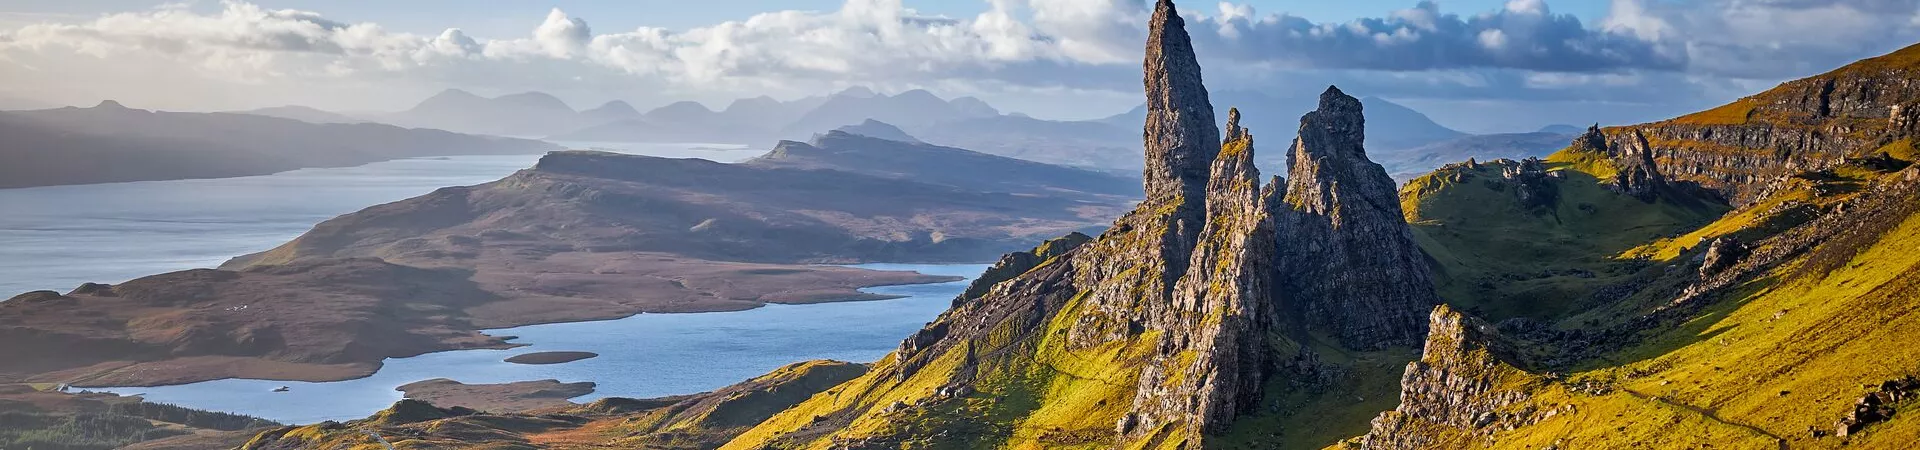 View over Old Man of Storr on Isle of Skye in Scotland